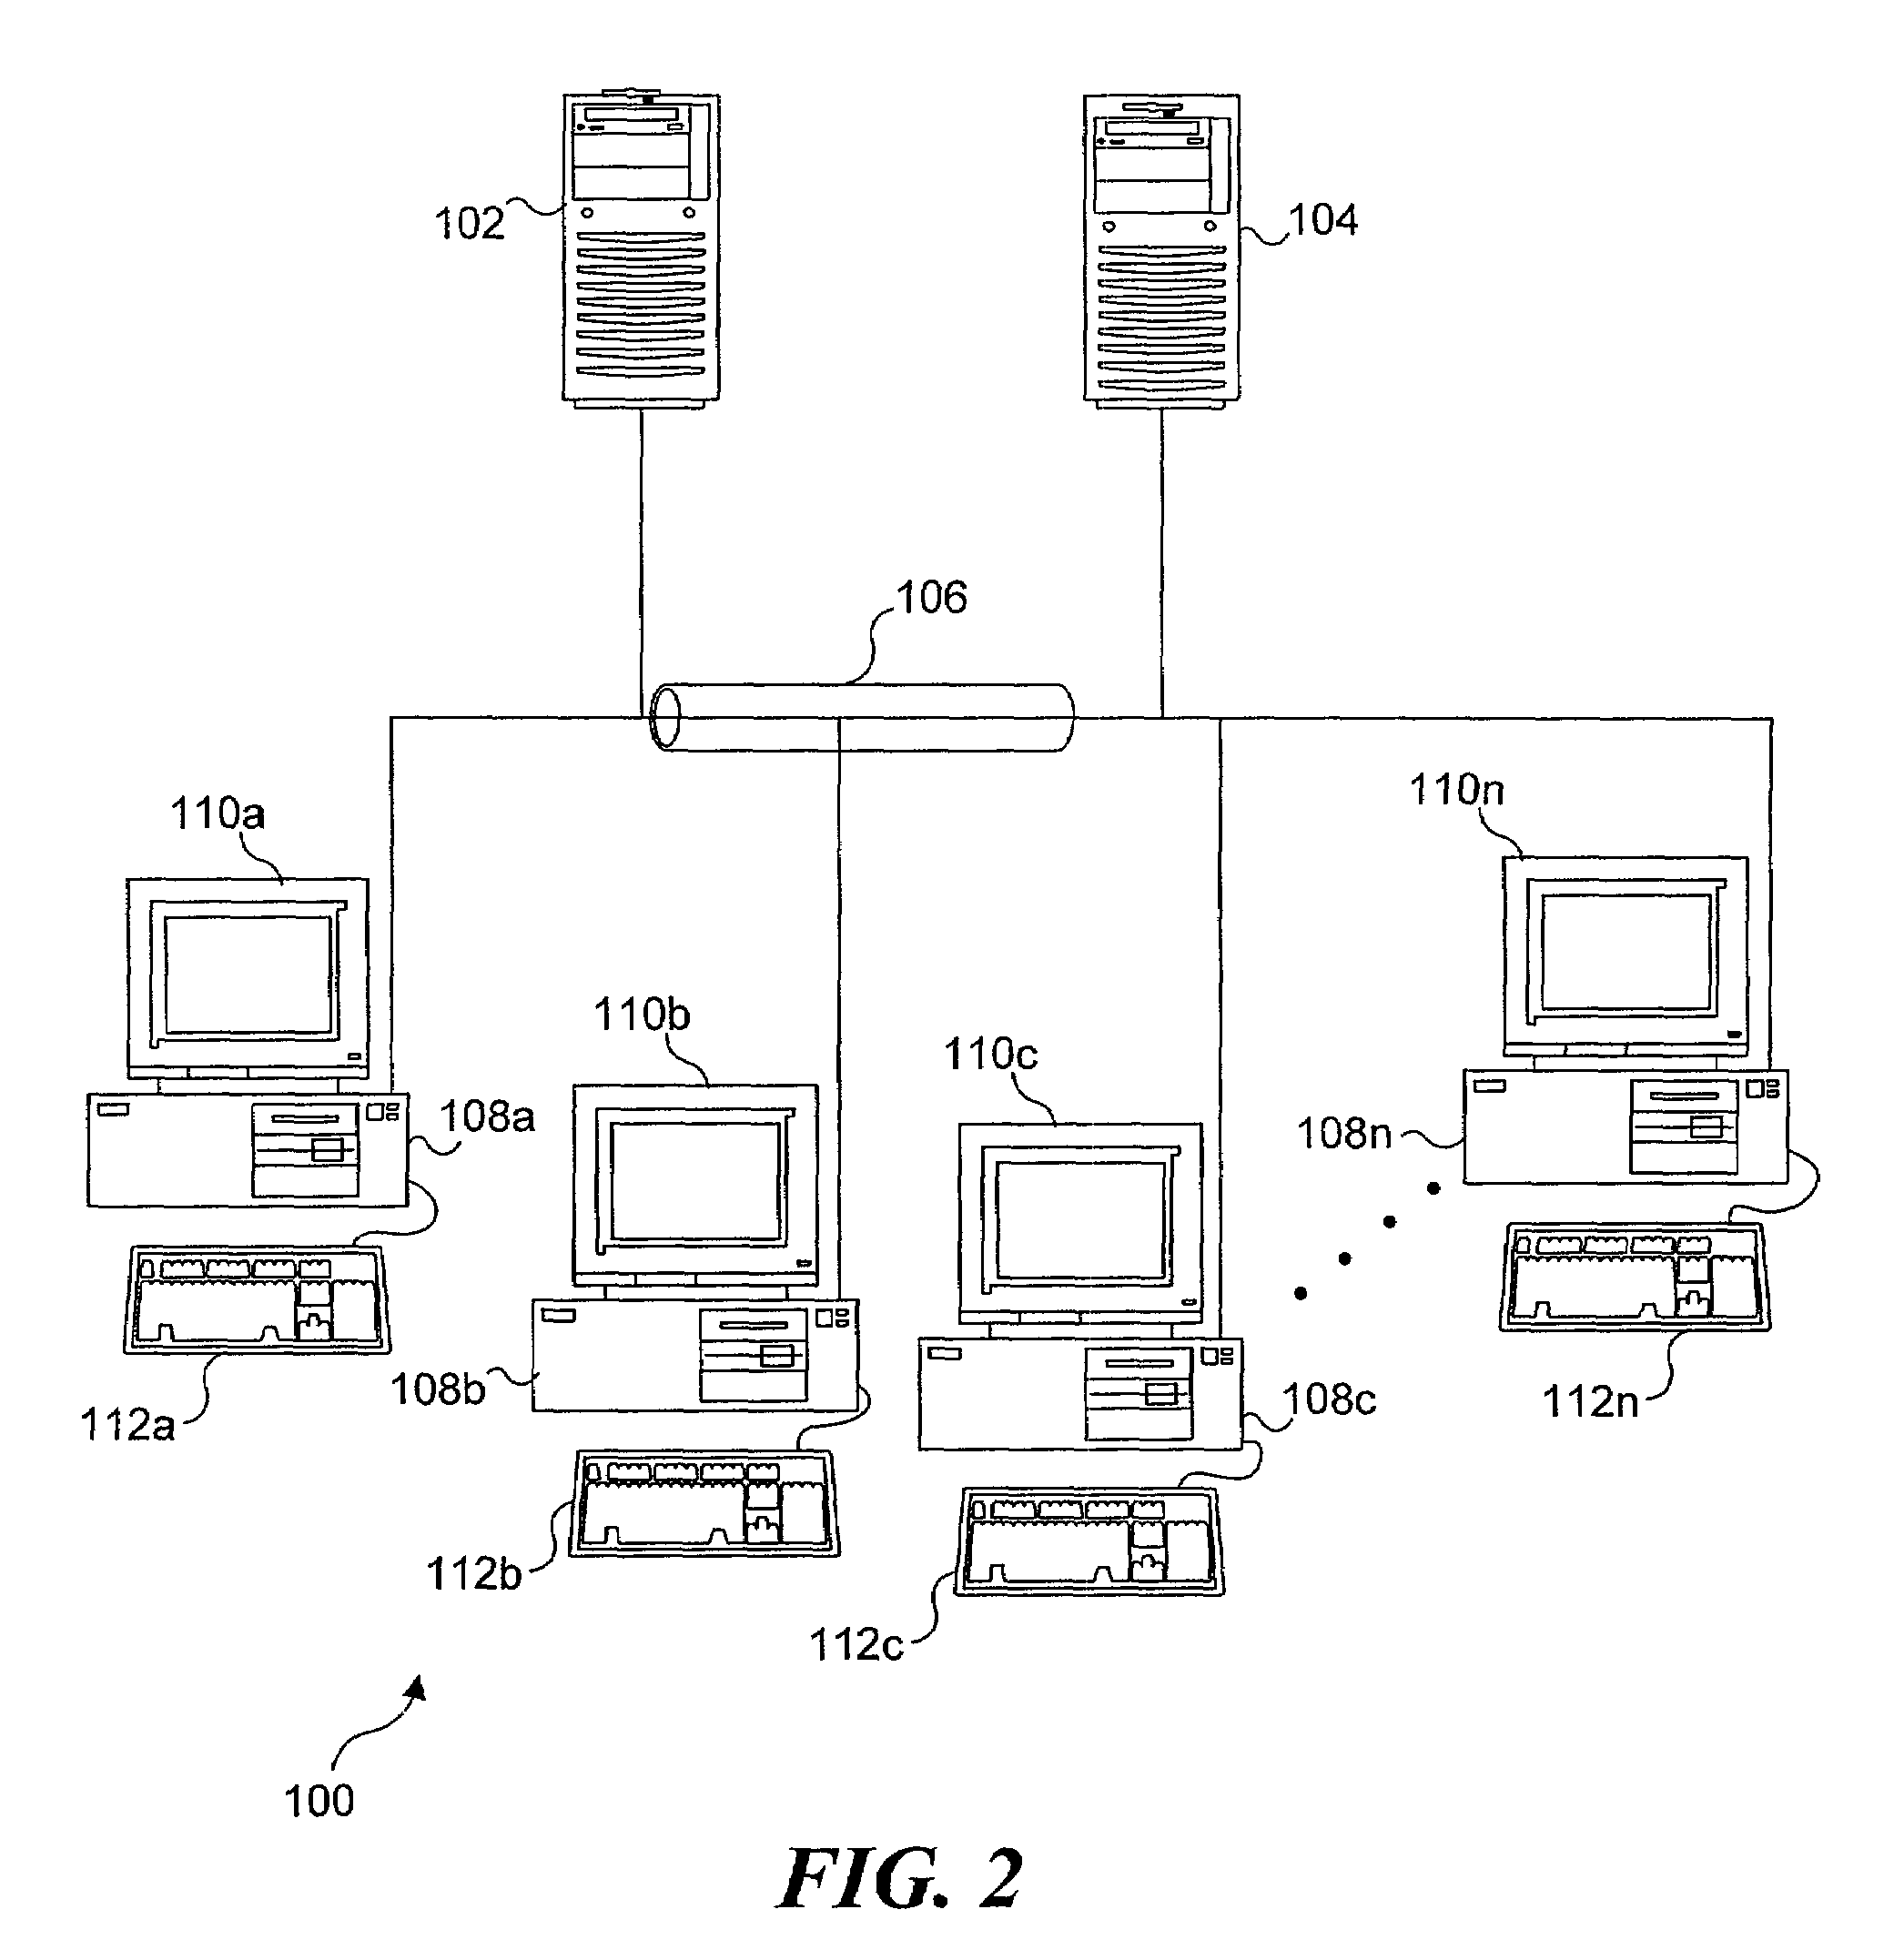 Distributed computing of a job corresponding to a plurality of predefined tasks